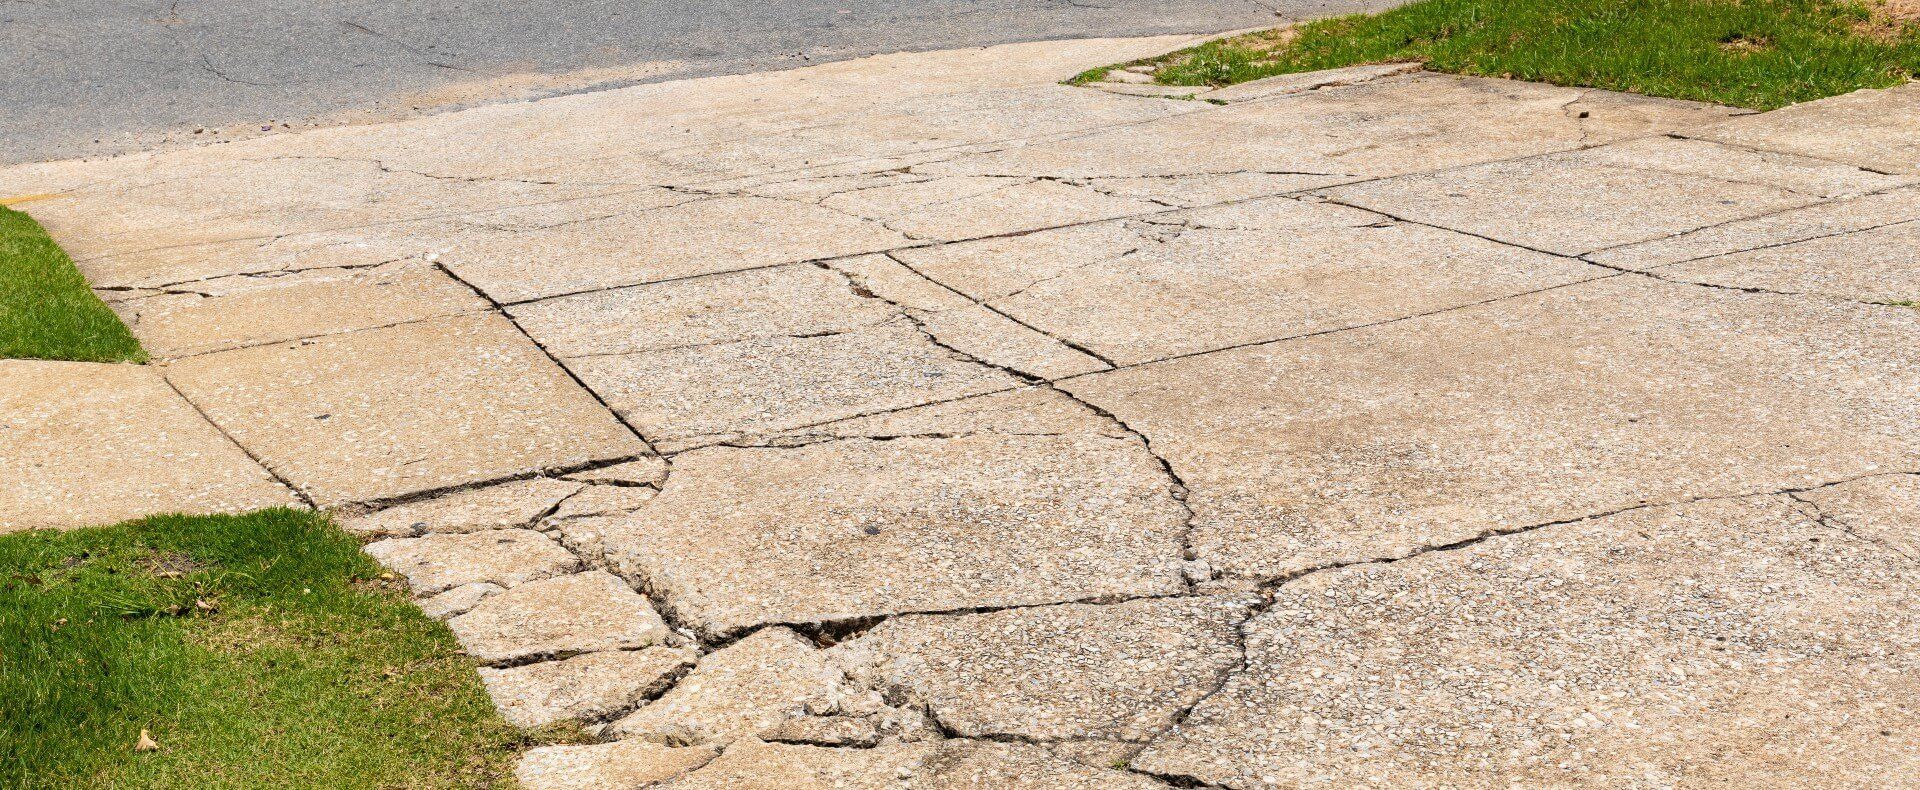 Cracks and damage in a concrete driveway